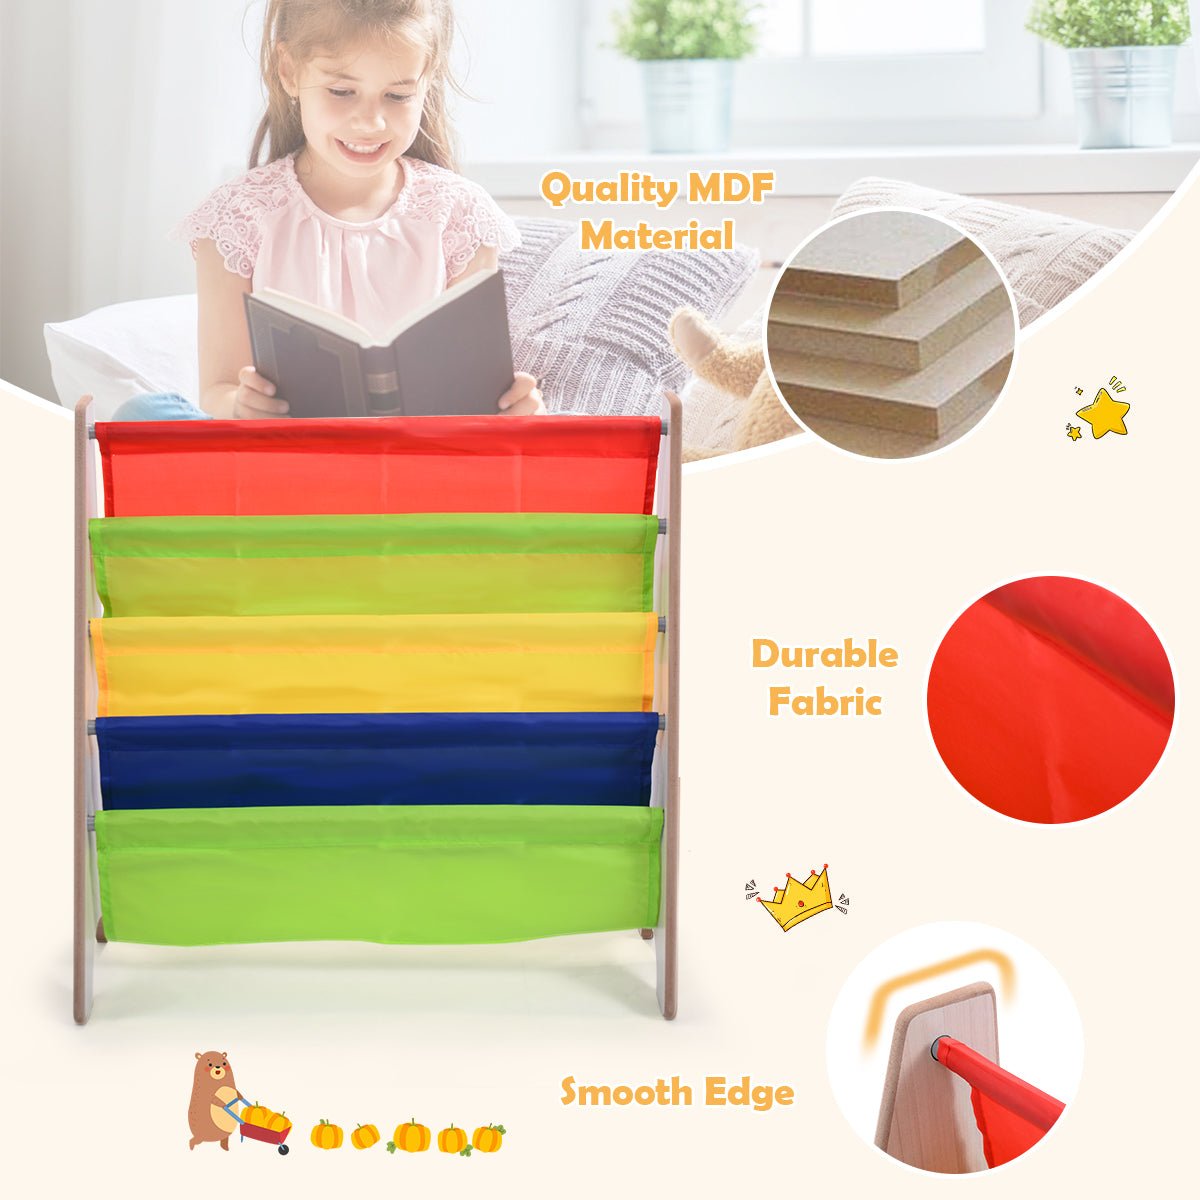 Children's Bookshelf - 4 Compartments for Neat and Easy Book Access